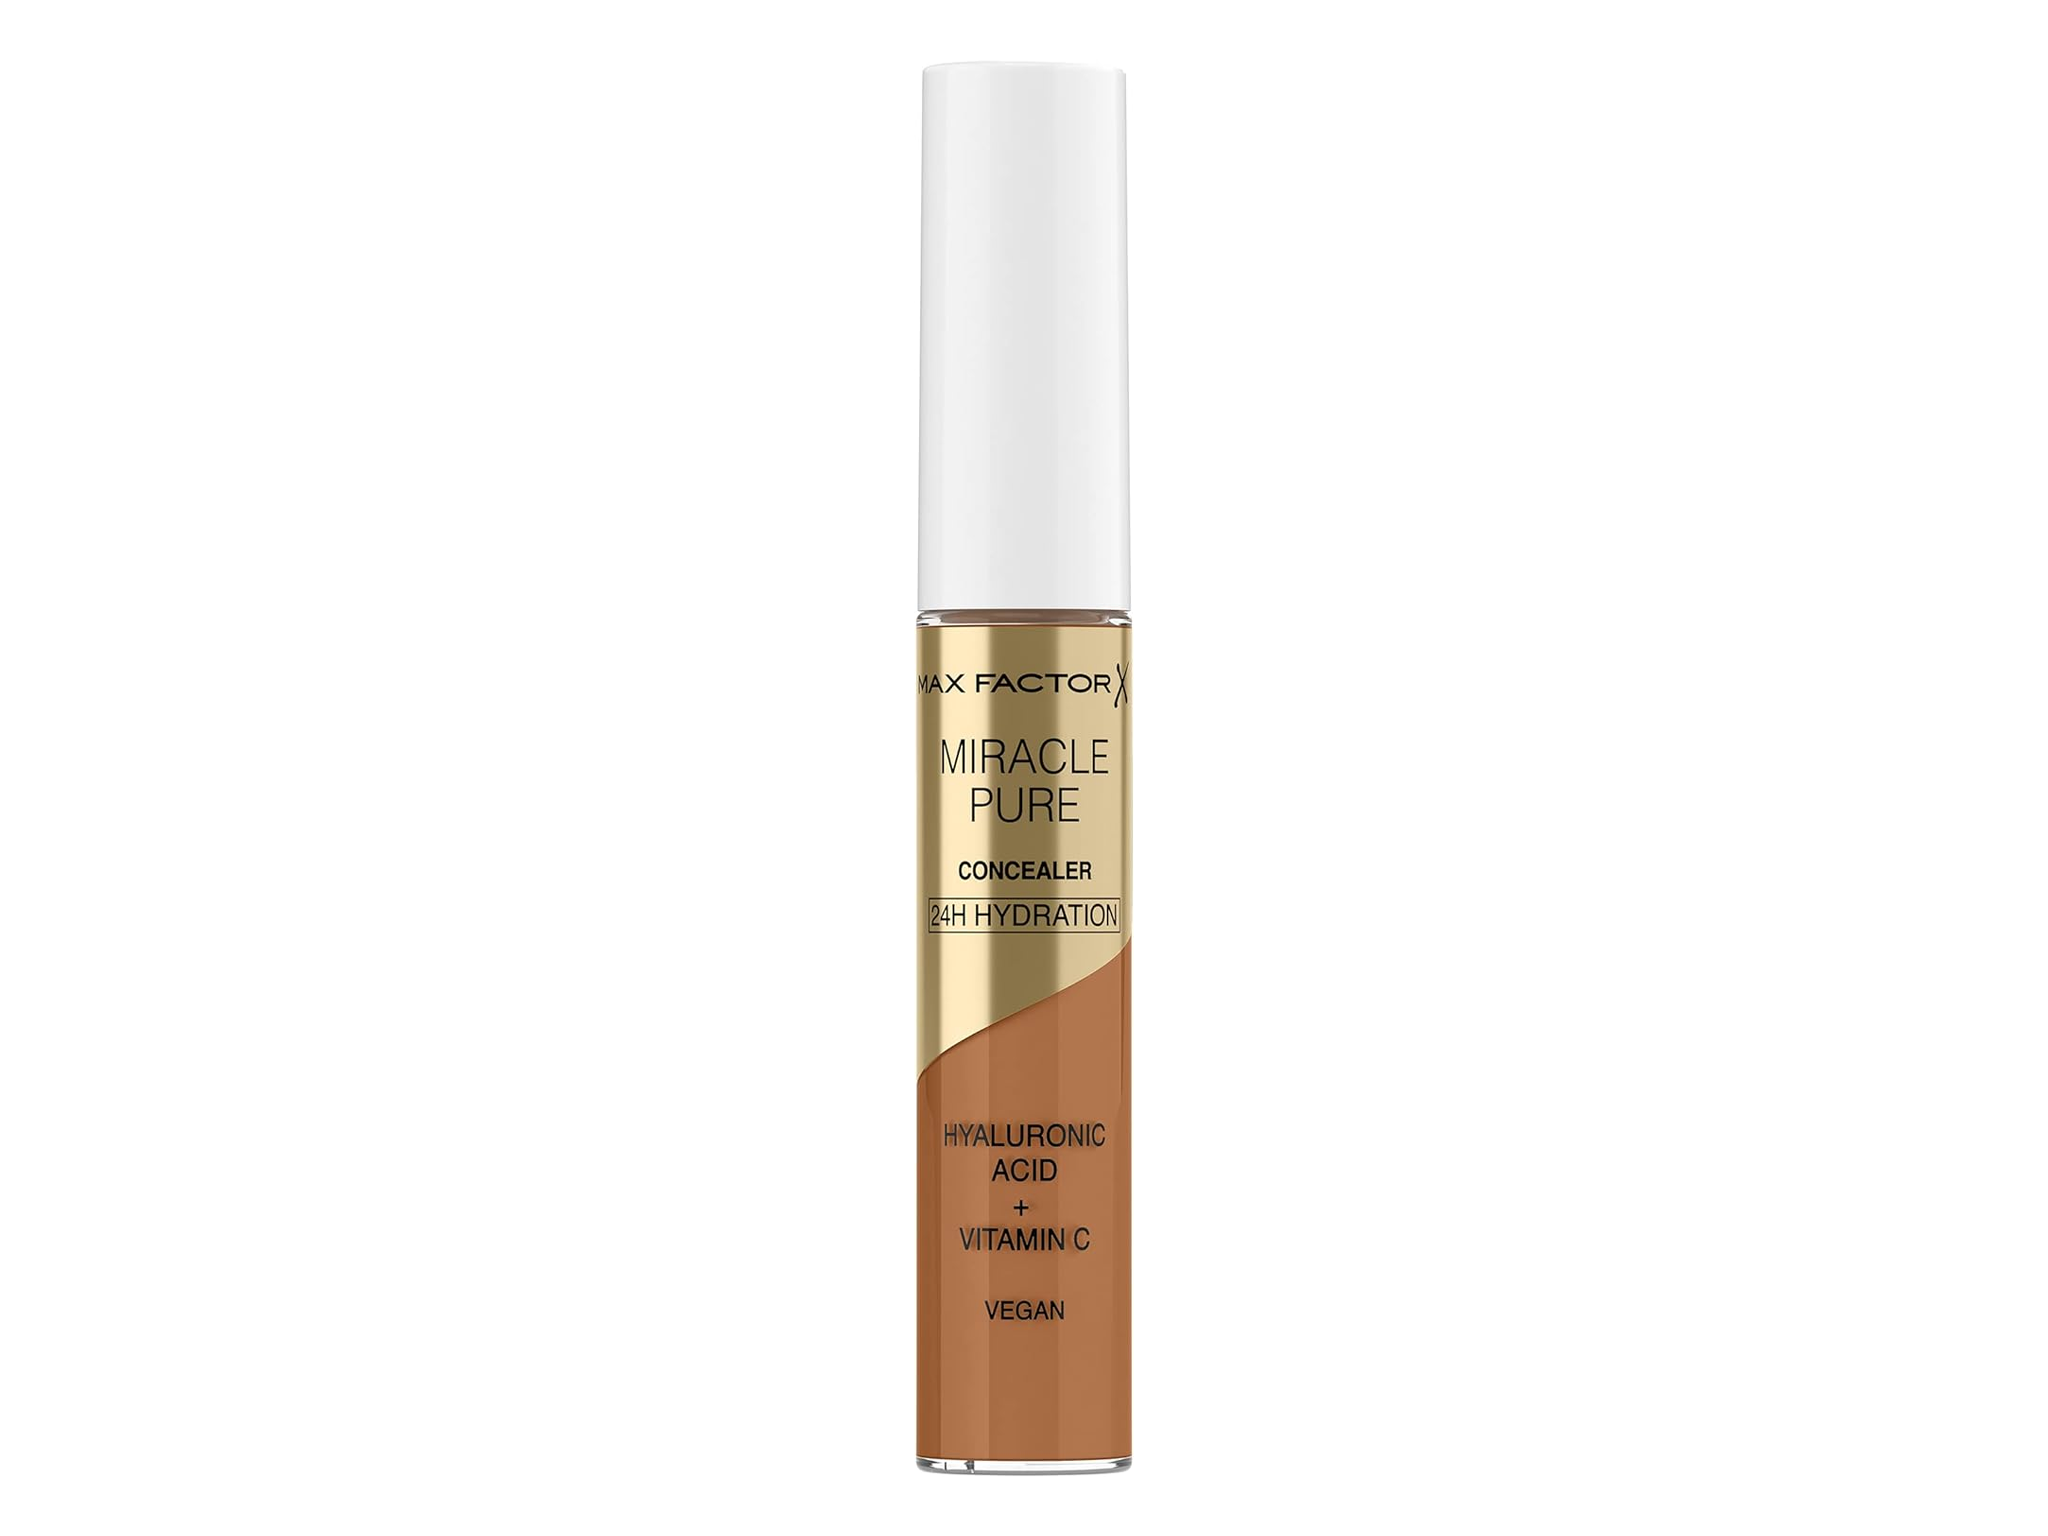 Max Factor miracle pure concealer